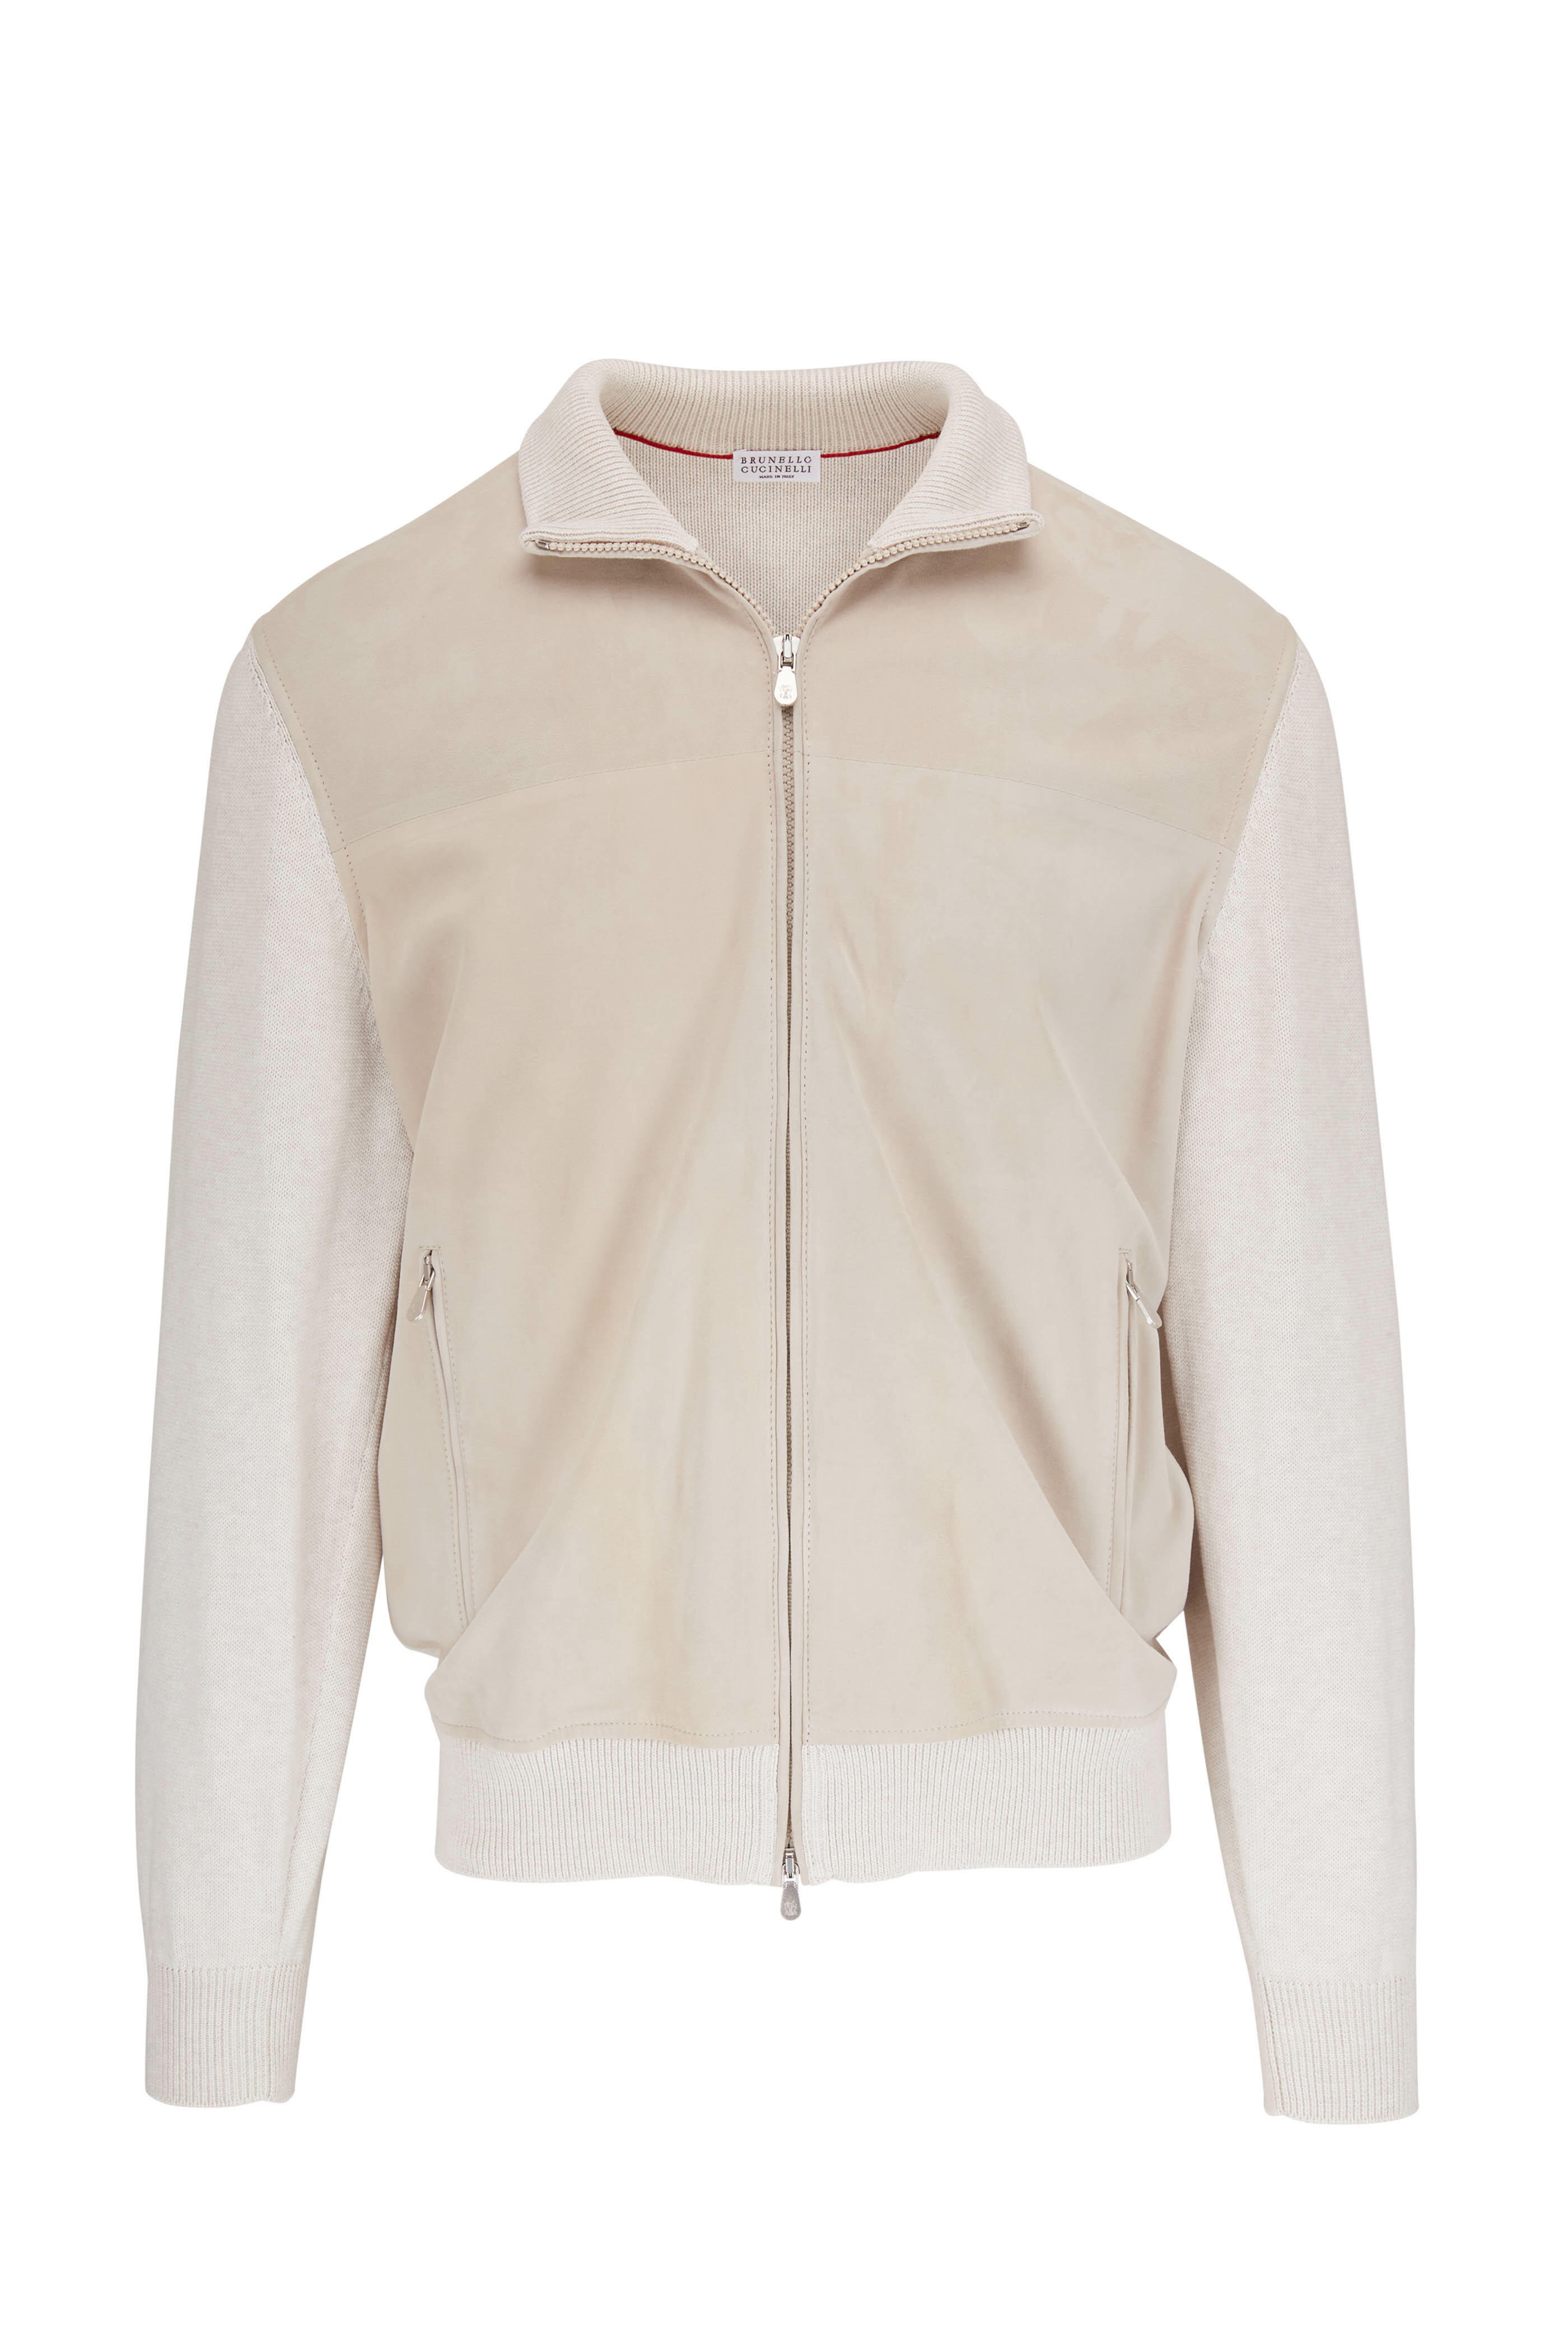 Brunello Cucinelli - Oat Suede Rib Knit Bomber | Mitchell Stores